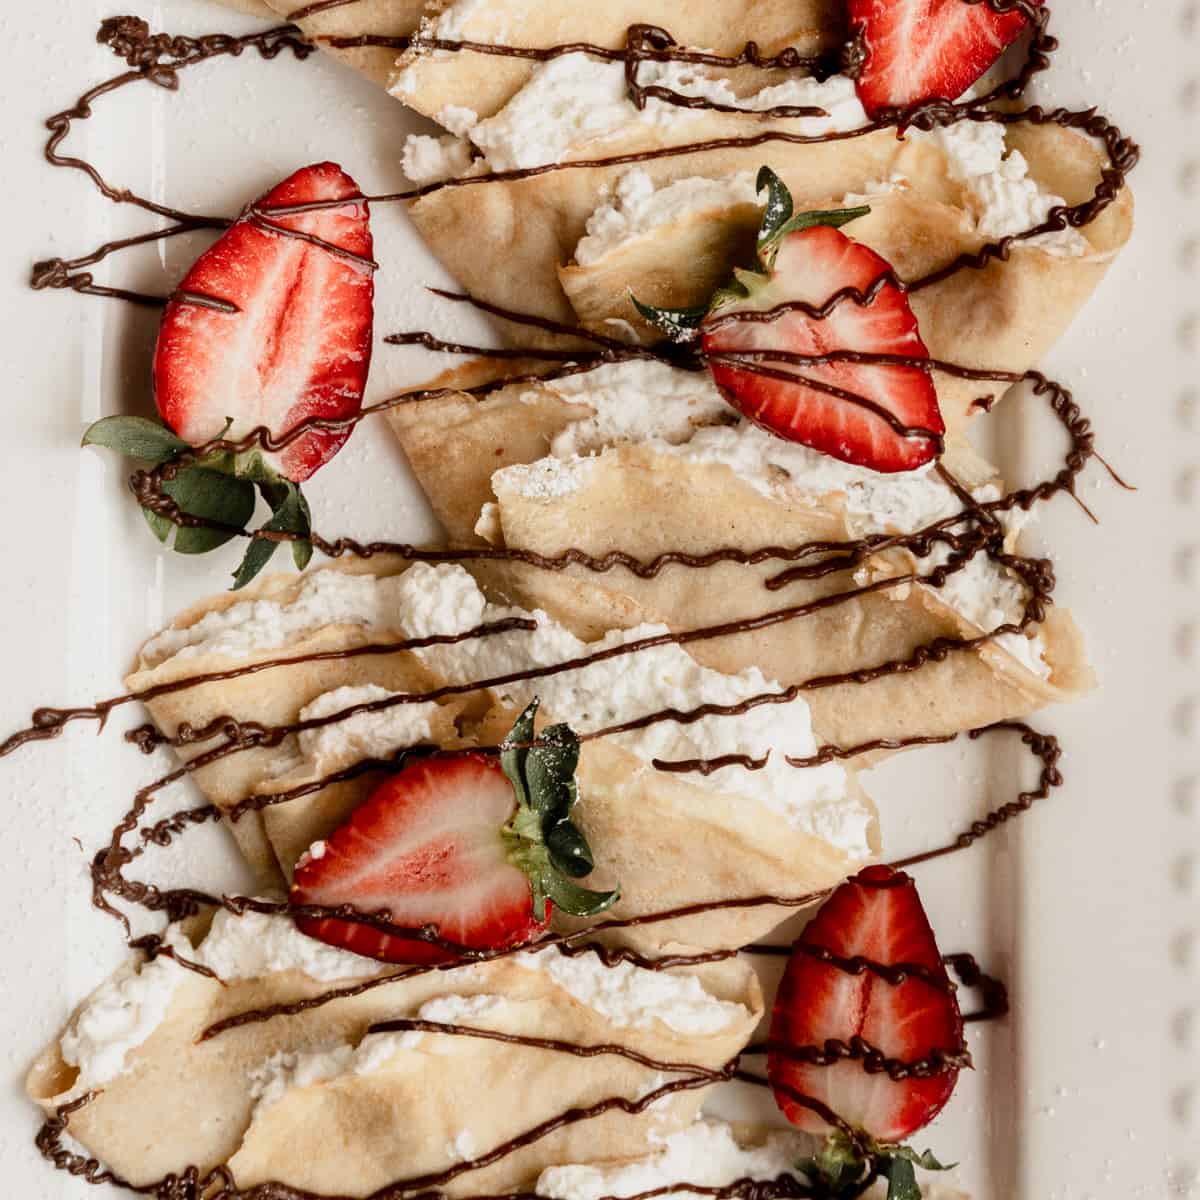 crepes-with-strawberries-and-cream-featured.